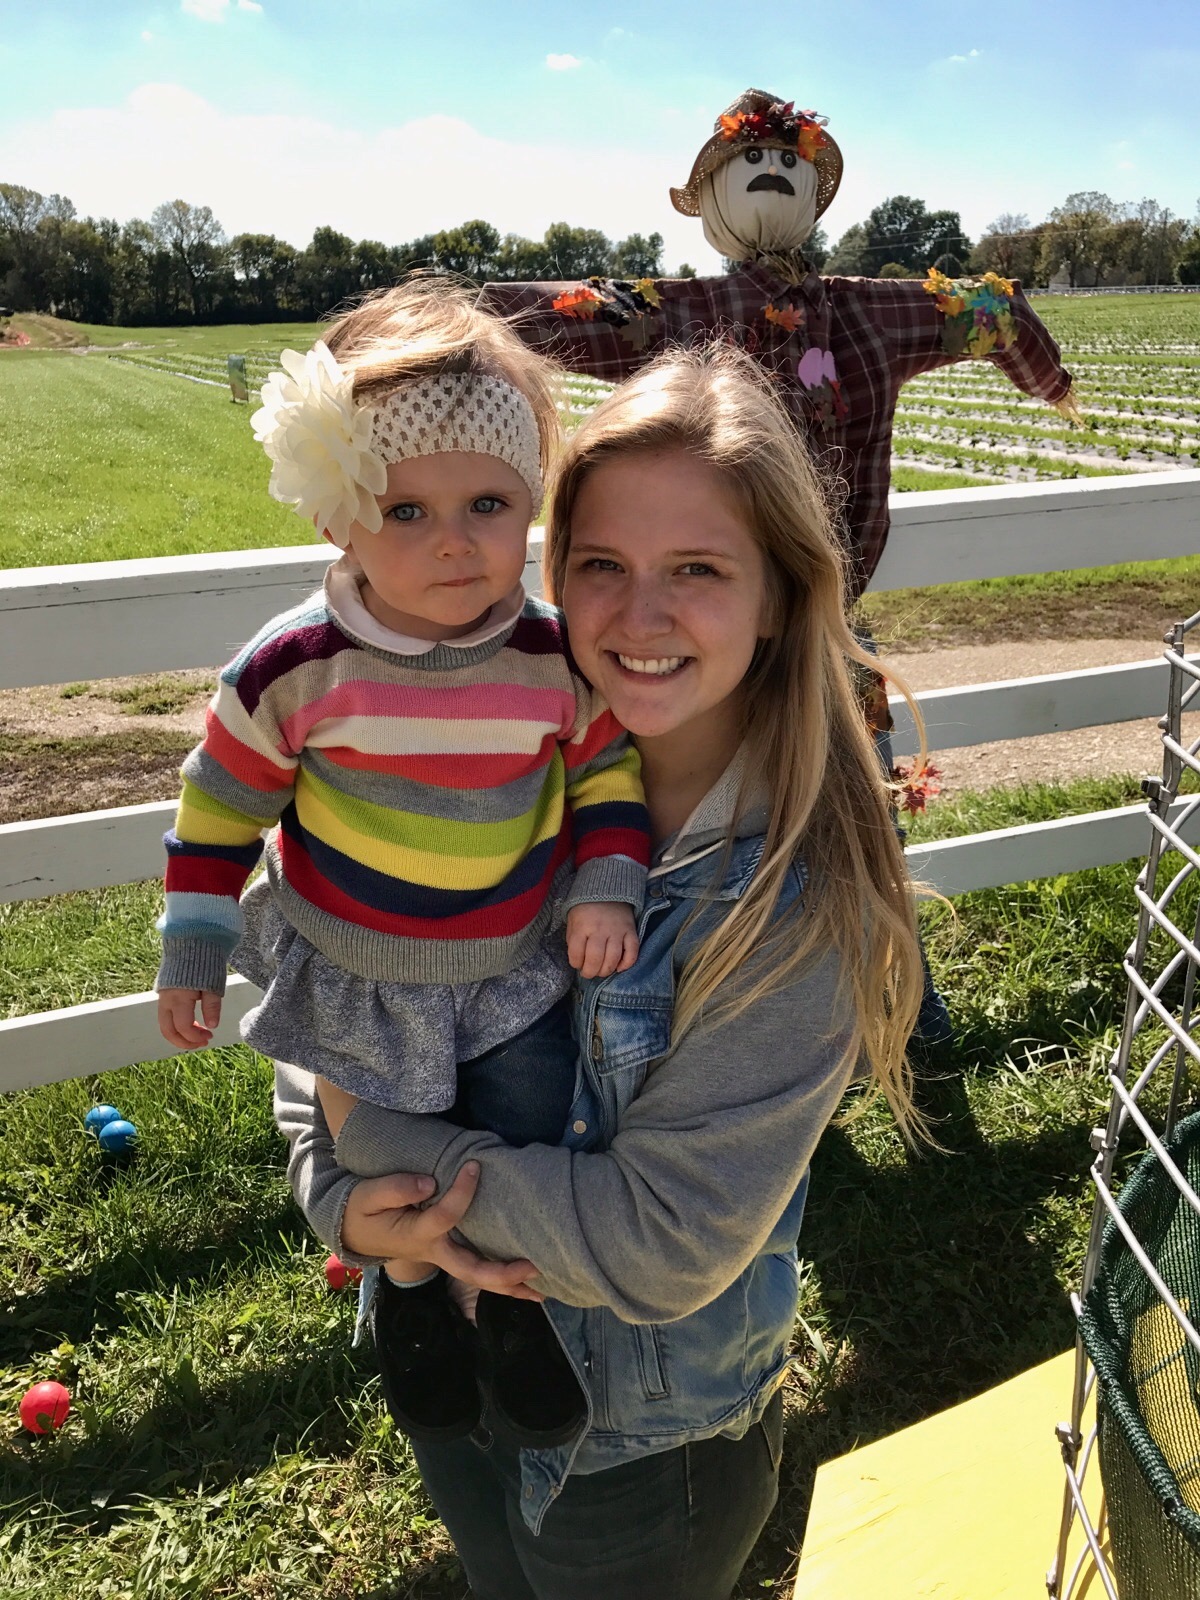 Our newest Northland CAPS intern, Natalie Masters, with her 1.5 year old niece.